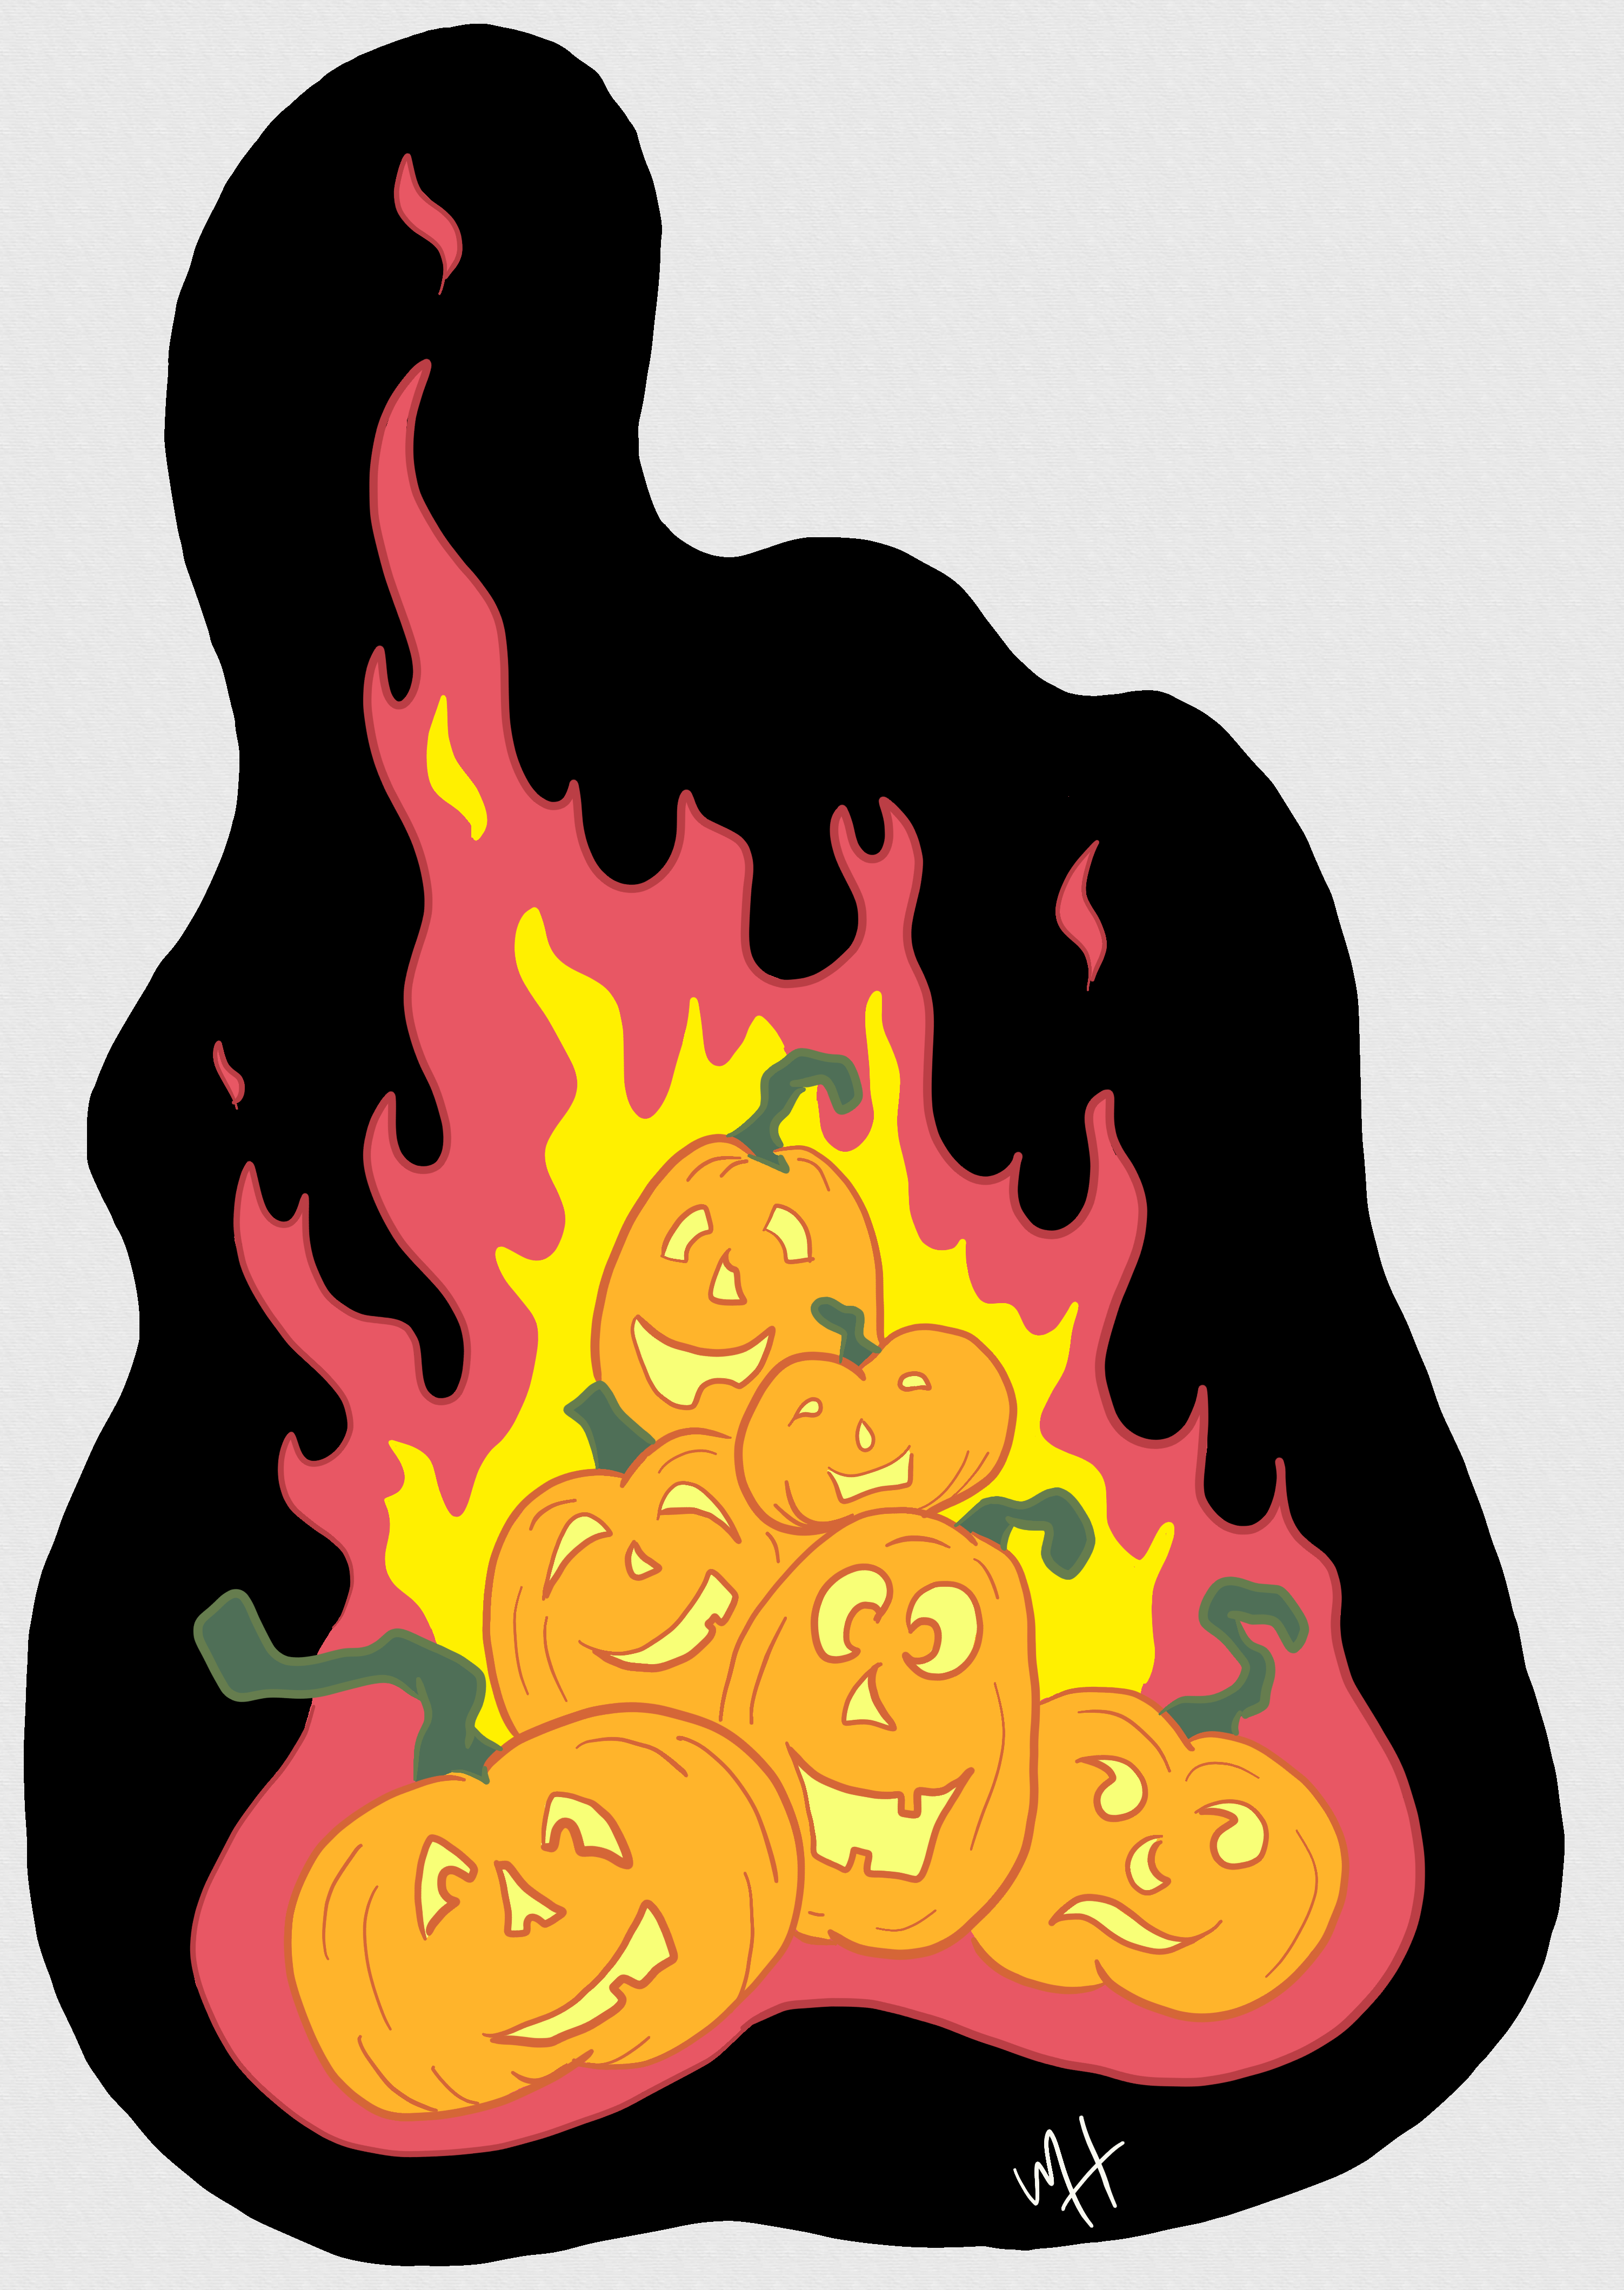 Inktober prompt: fire. A drawing of a stack of smiling jack-o'-lanterns on fire.